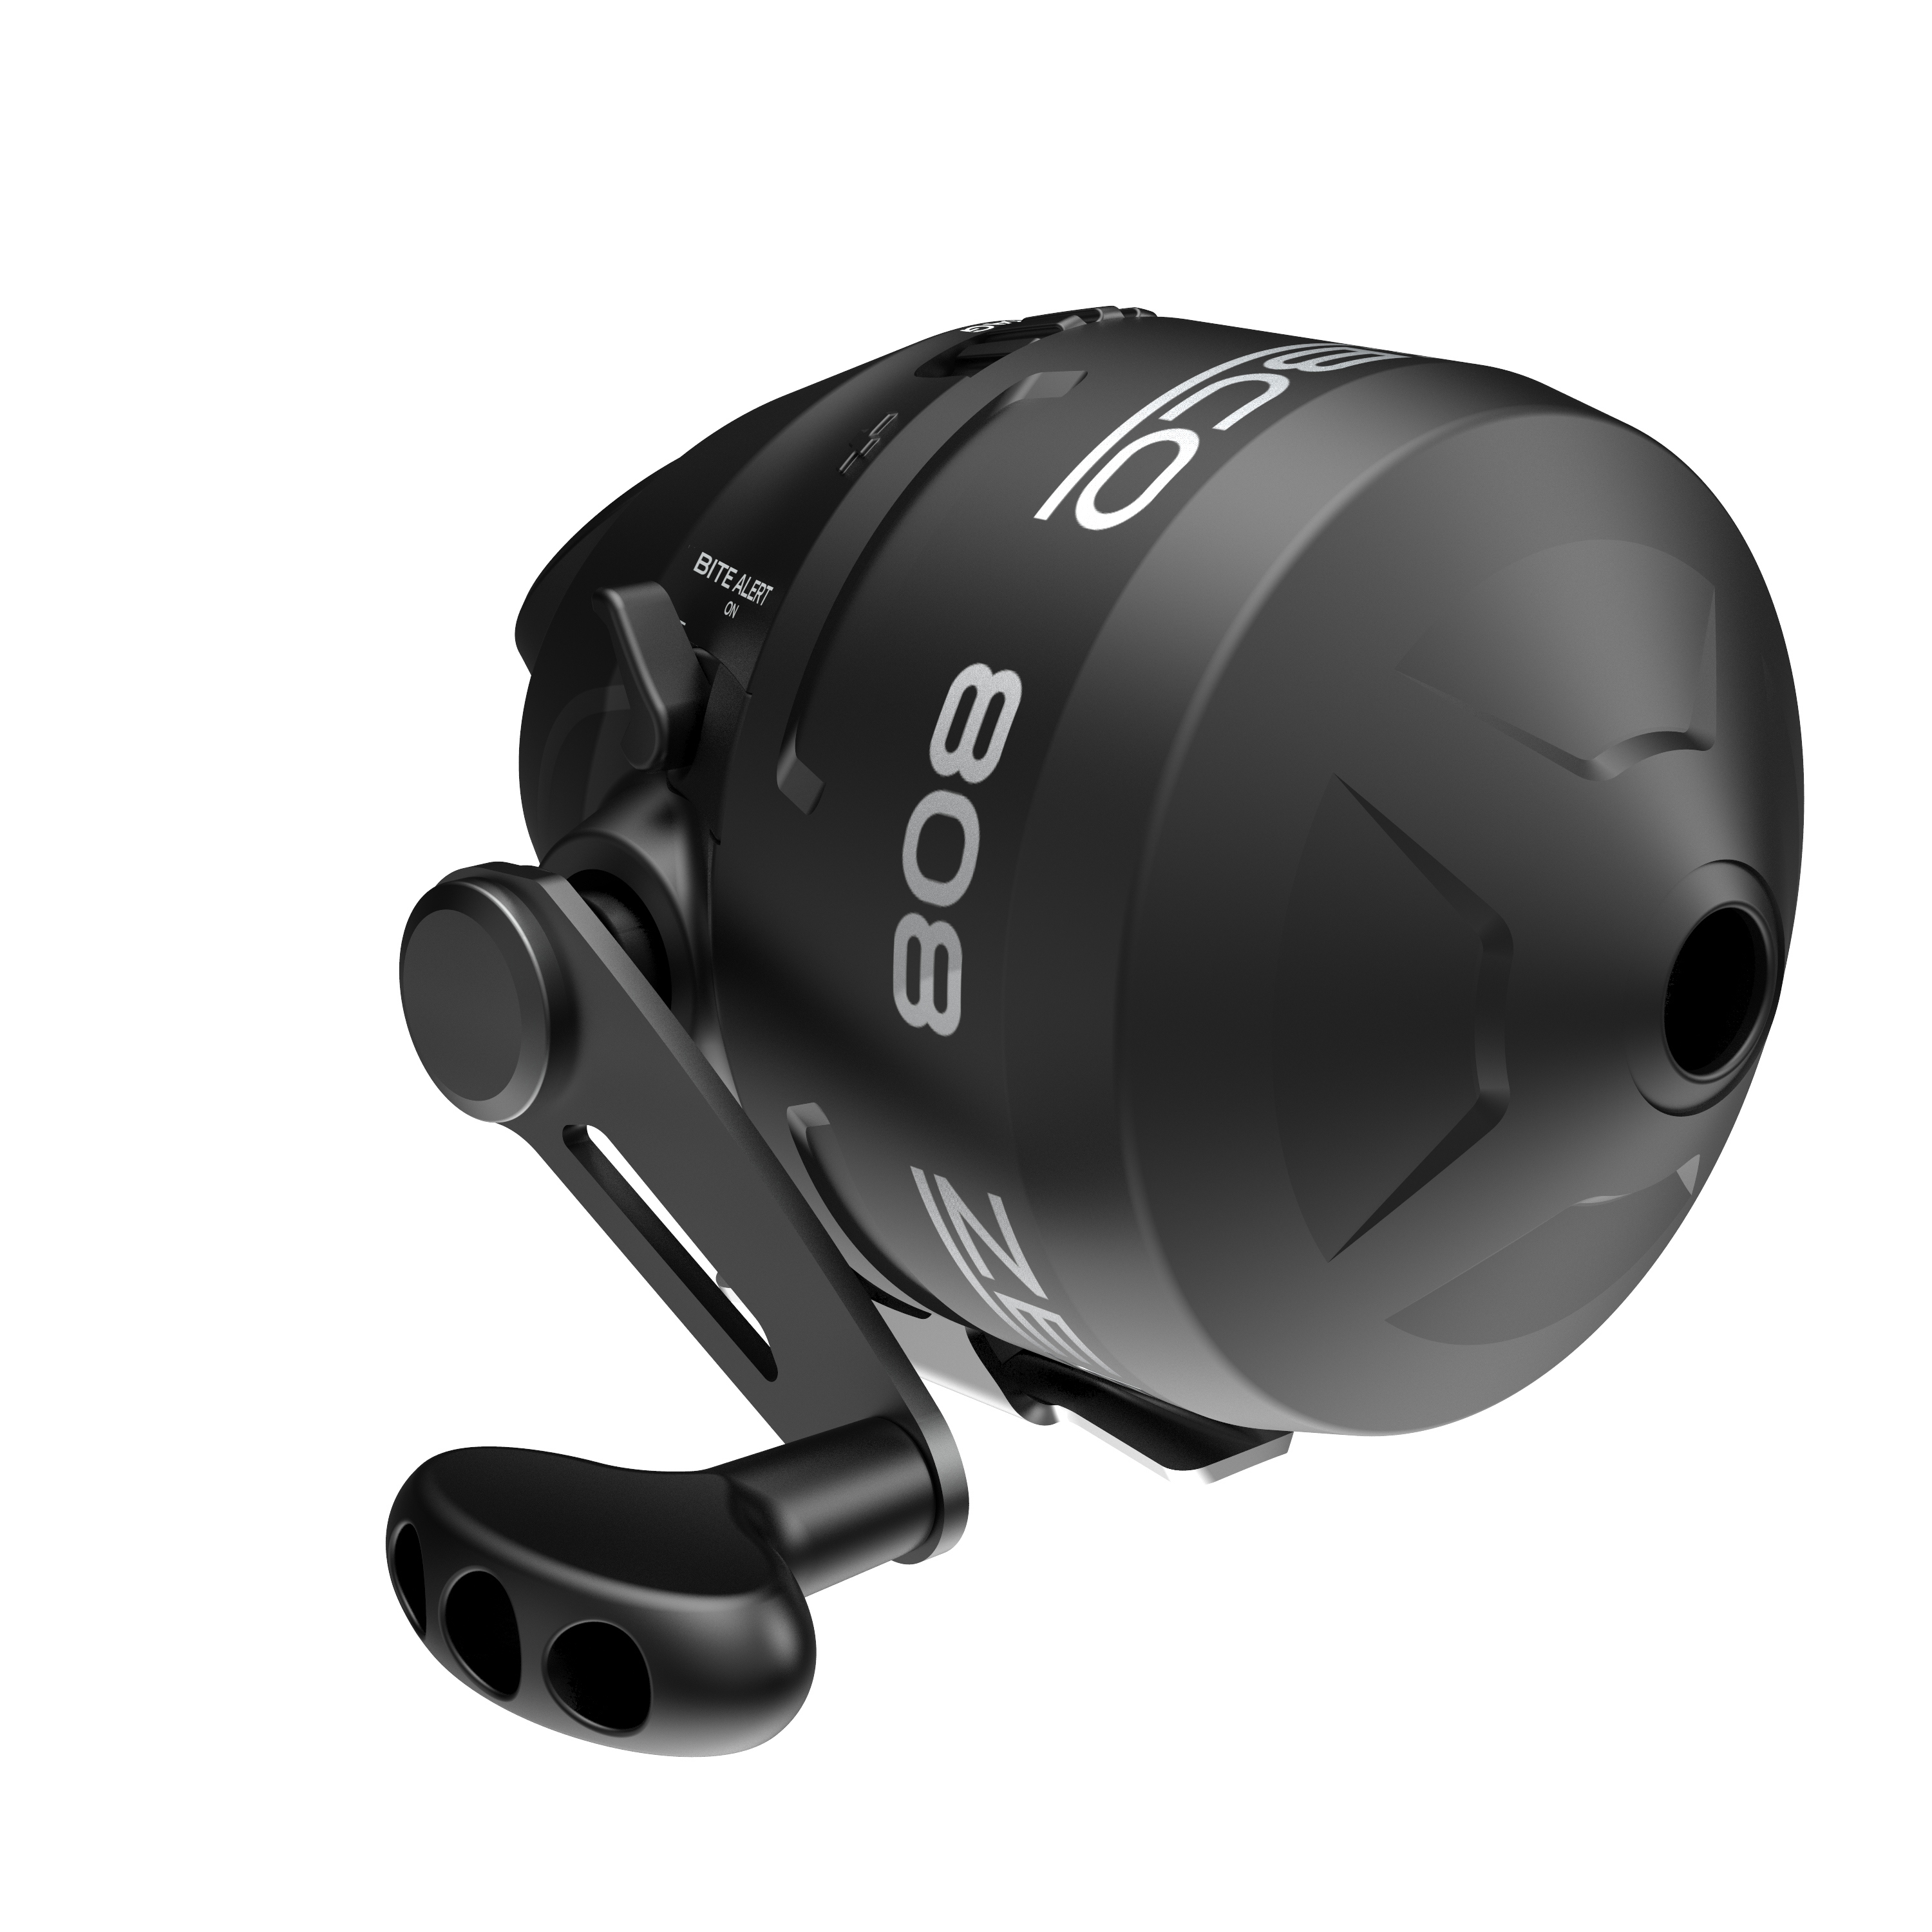  Zebco 808 Saltwater Spincast Fishing Reel, Stainless